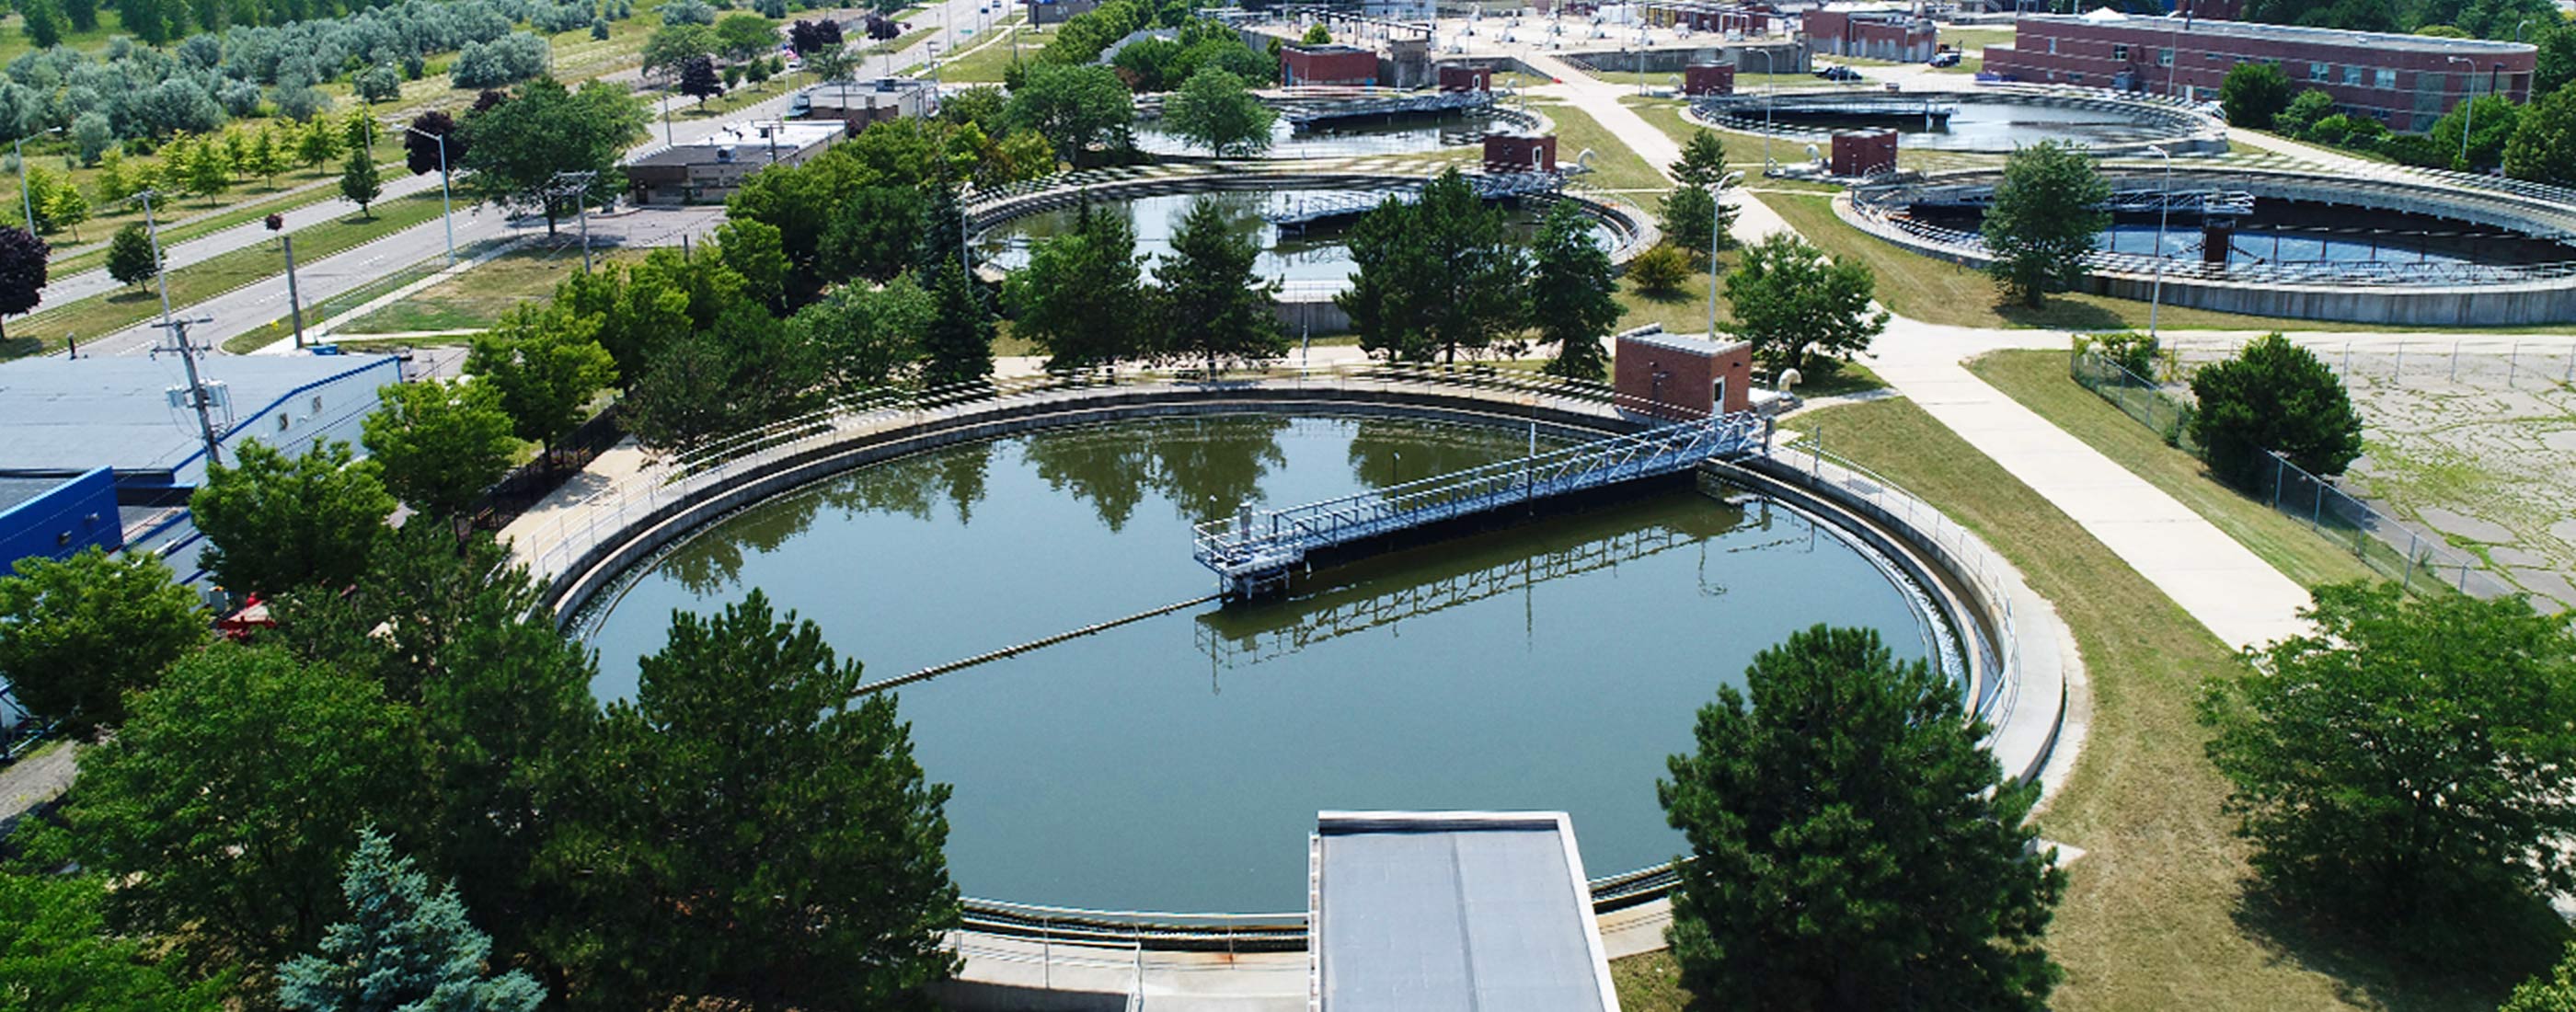 An up-close view of Michigan's second largest wastewater system.